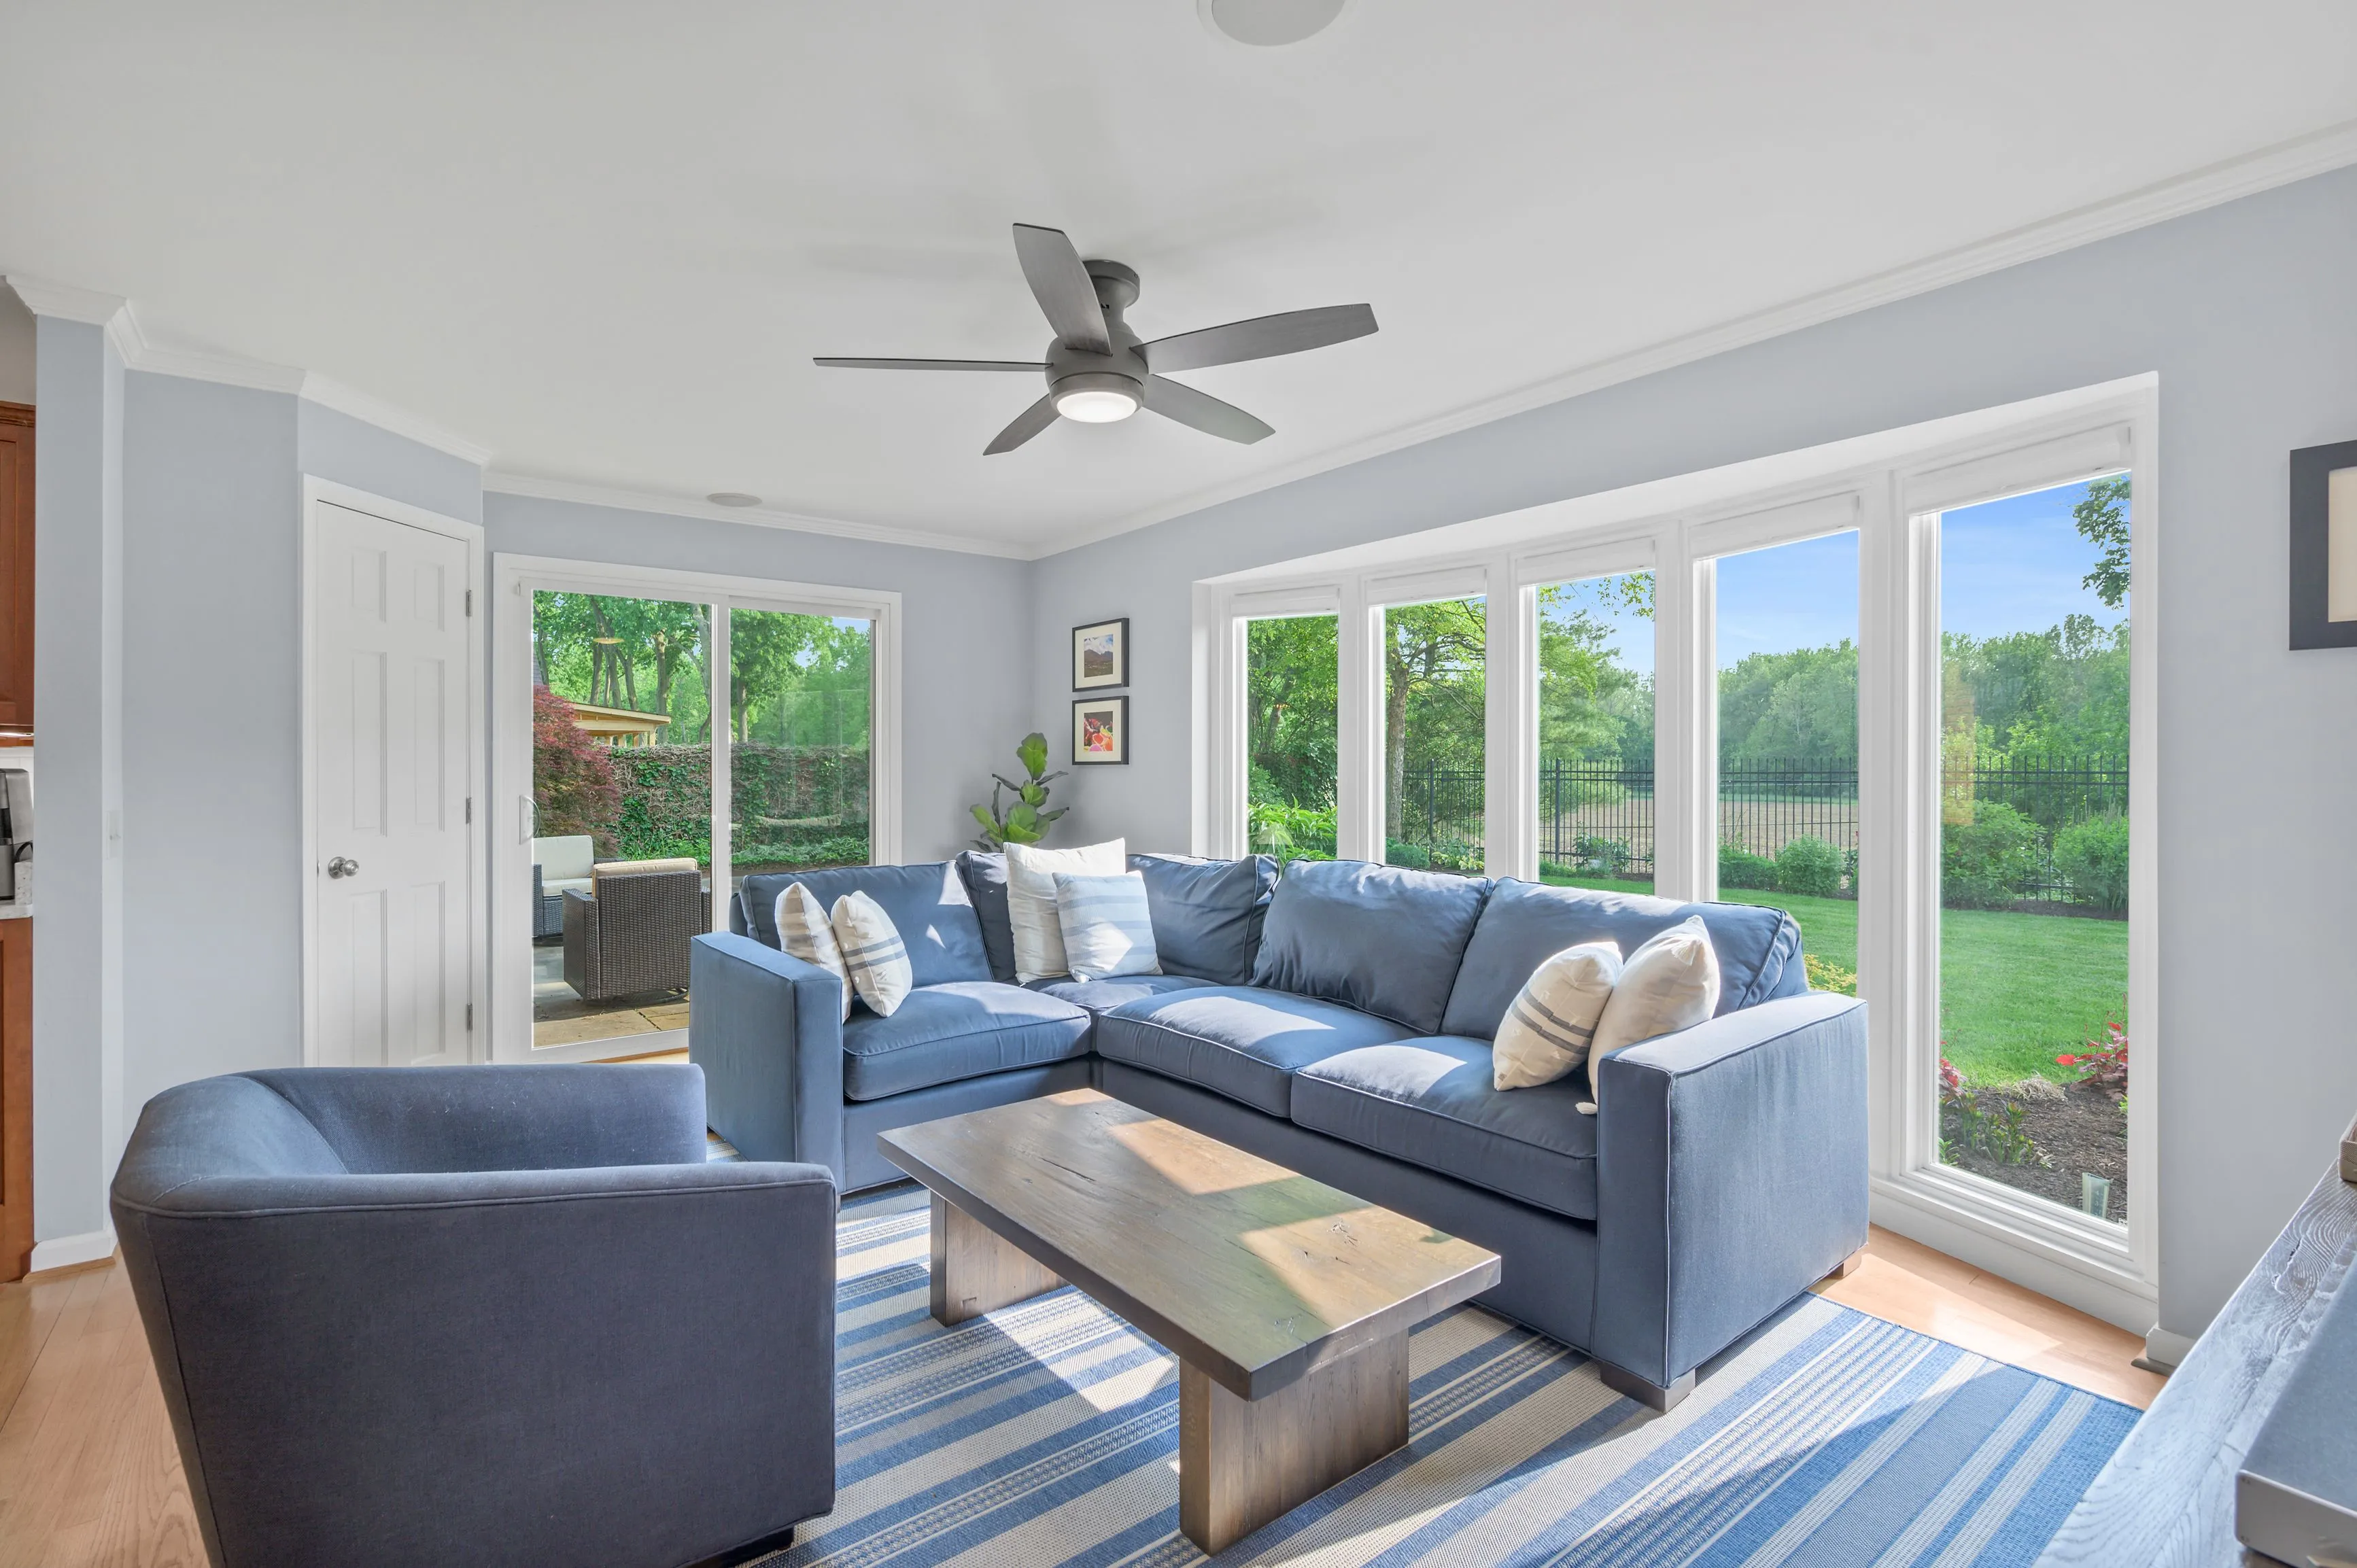 Bright living room with blue sofas, wooden coffee table, and large windows overlooking a green yard.